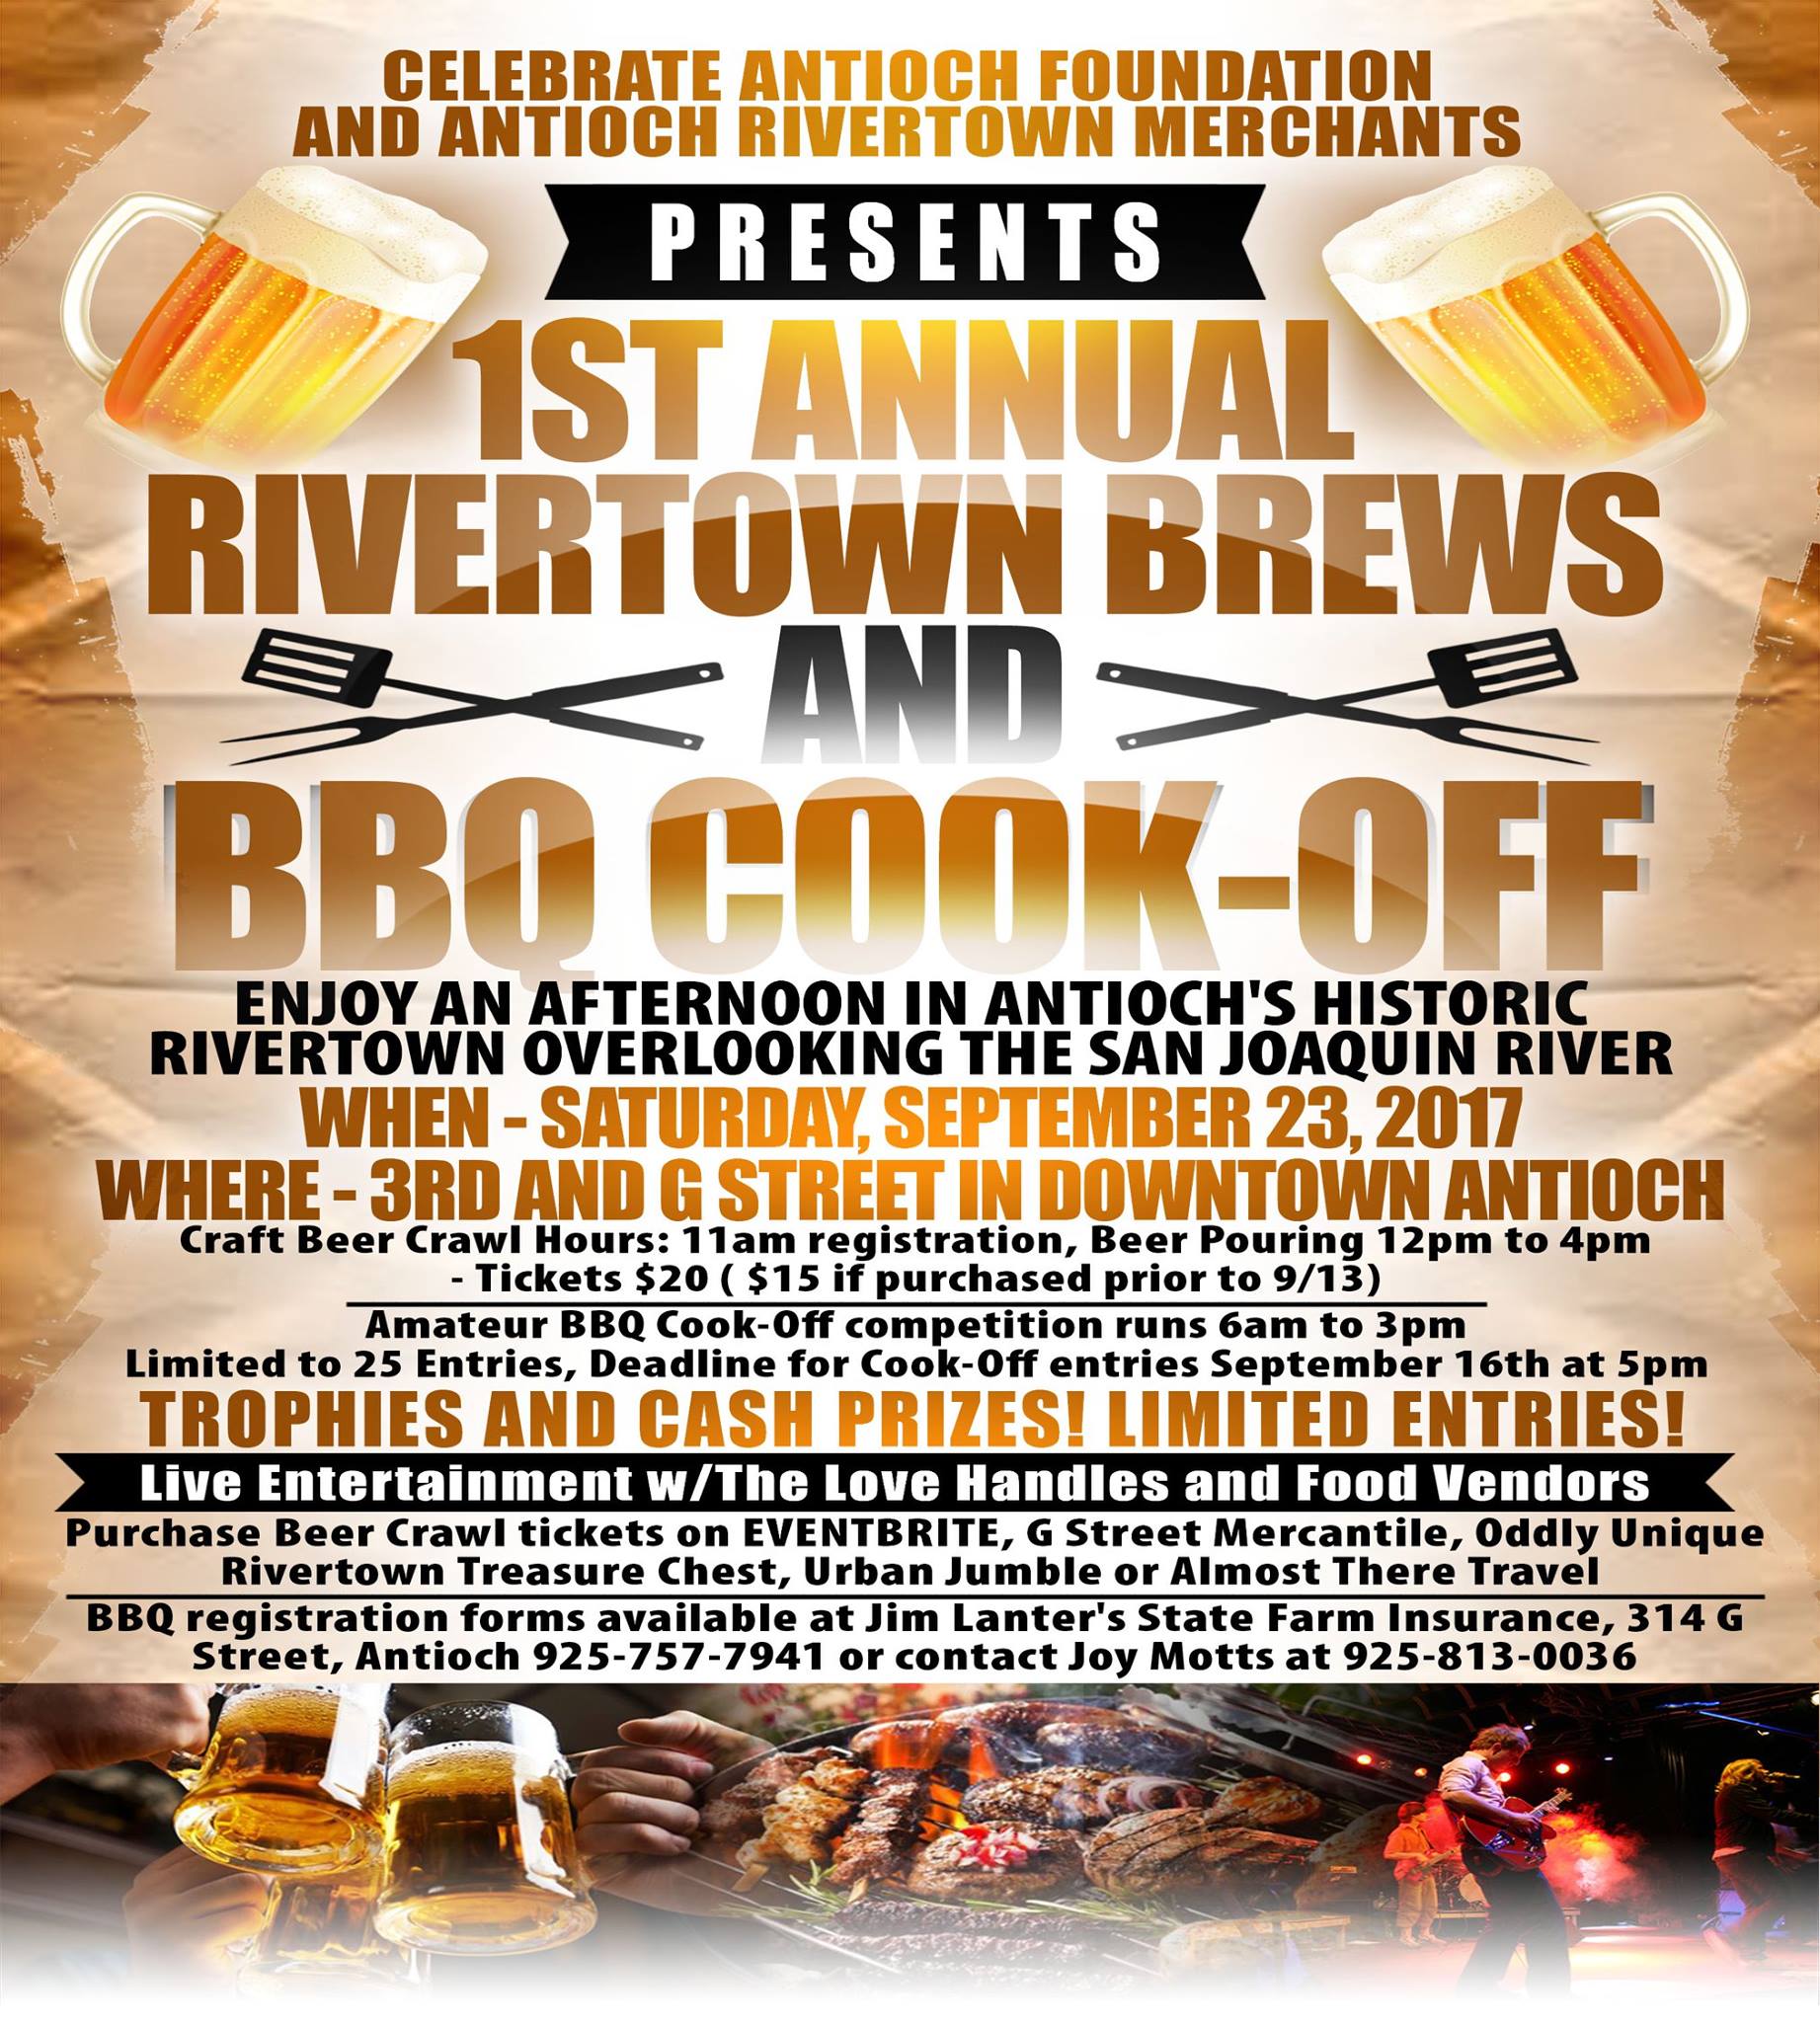 First Annual Antioch Rivertown Brews and BBQ Cook-Off